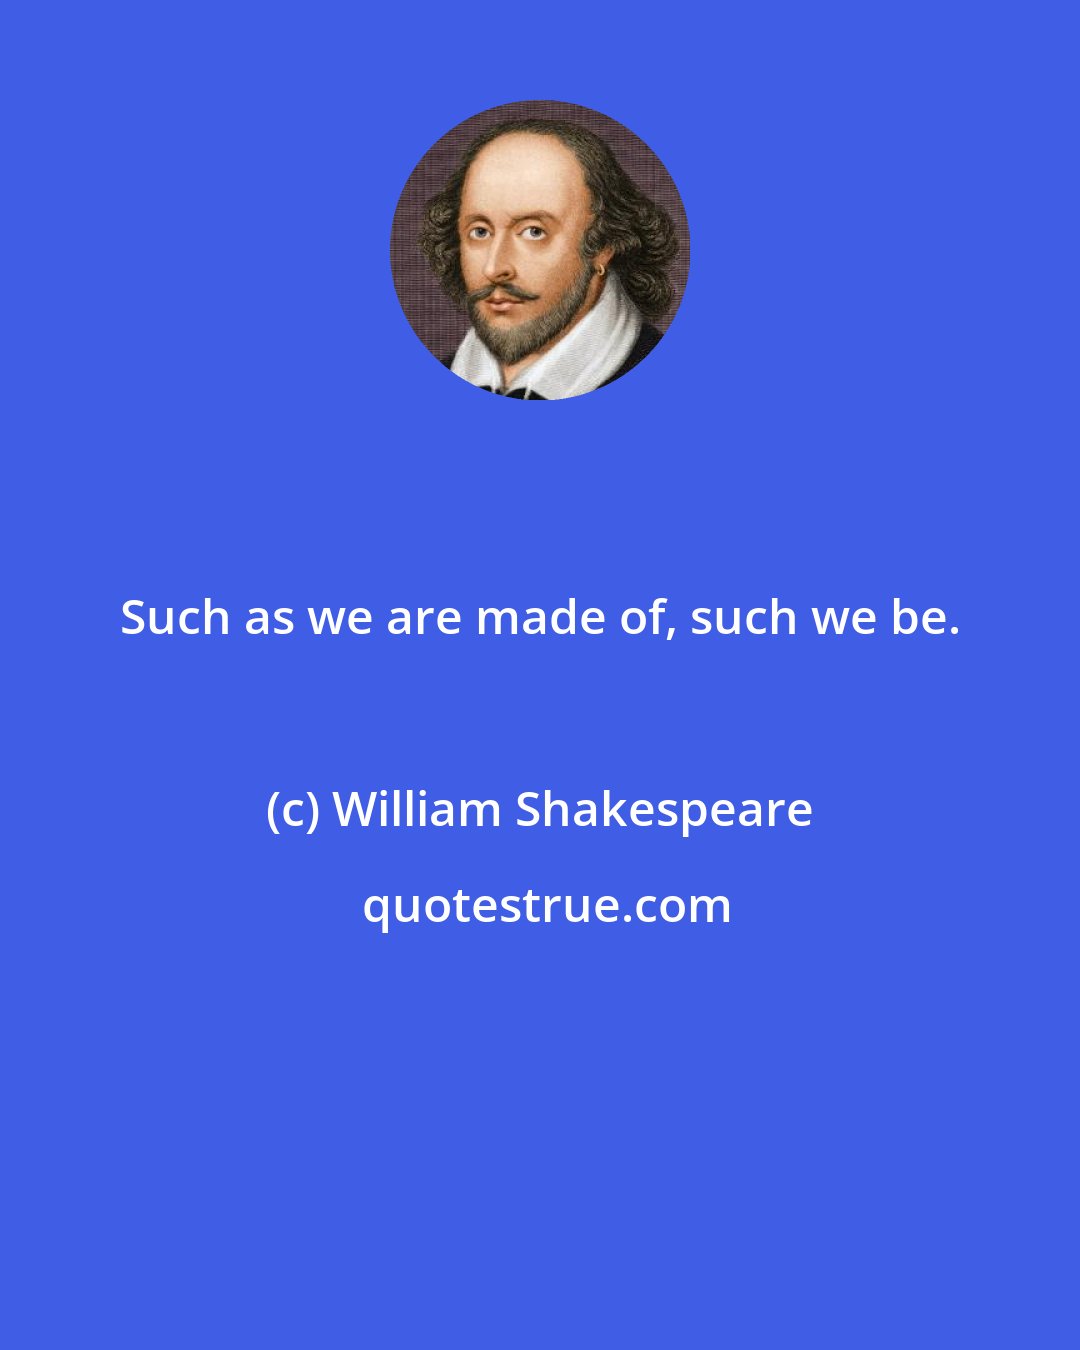 William Shakespeare: Such as we are made of, such we be.